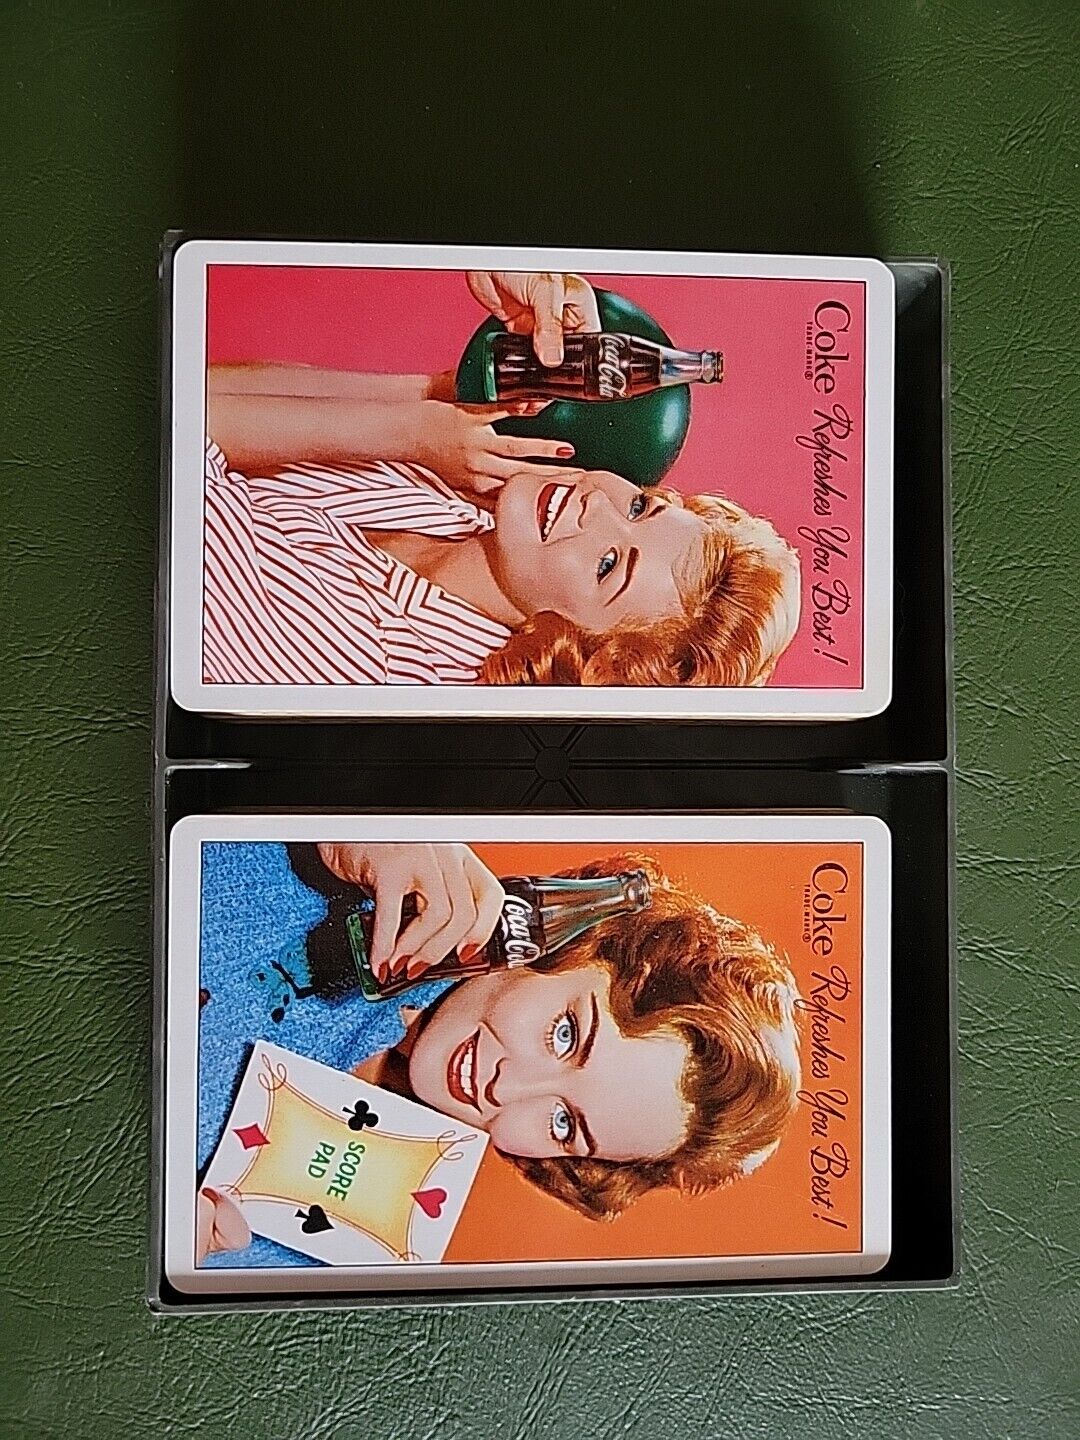 1961 Vtg Coca-Cola, (2) Complete Decks of Playing Cards Rockabilly 60s Kitch 